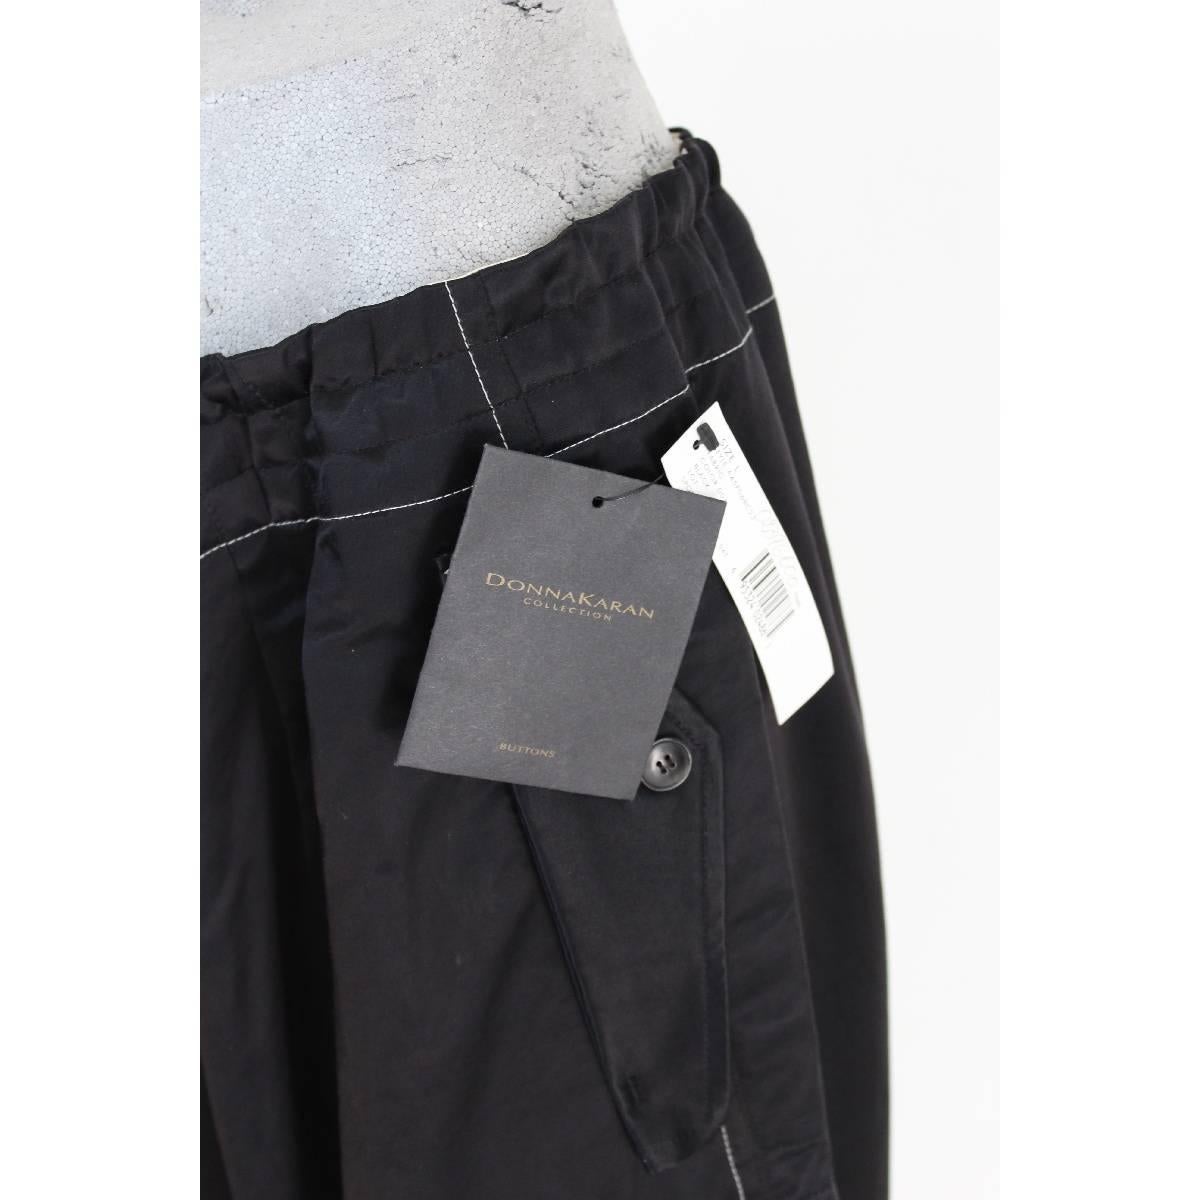 Women's NWT Donna Karan vintage palazzo trousers black pants size L made in italy